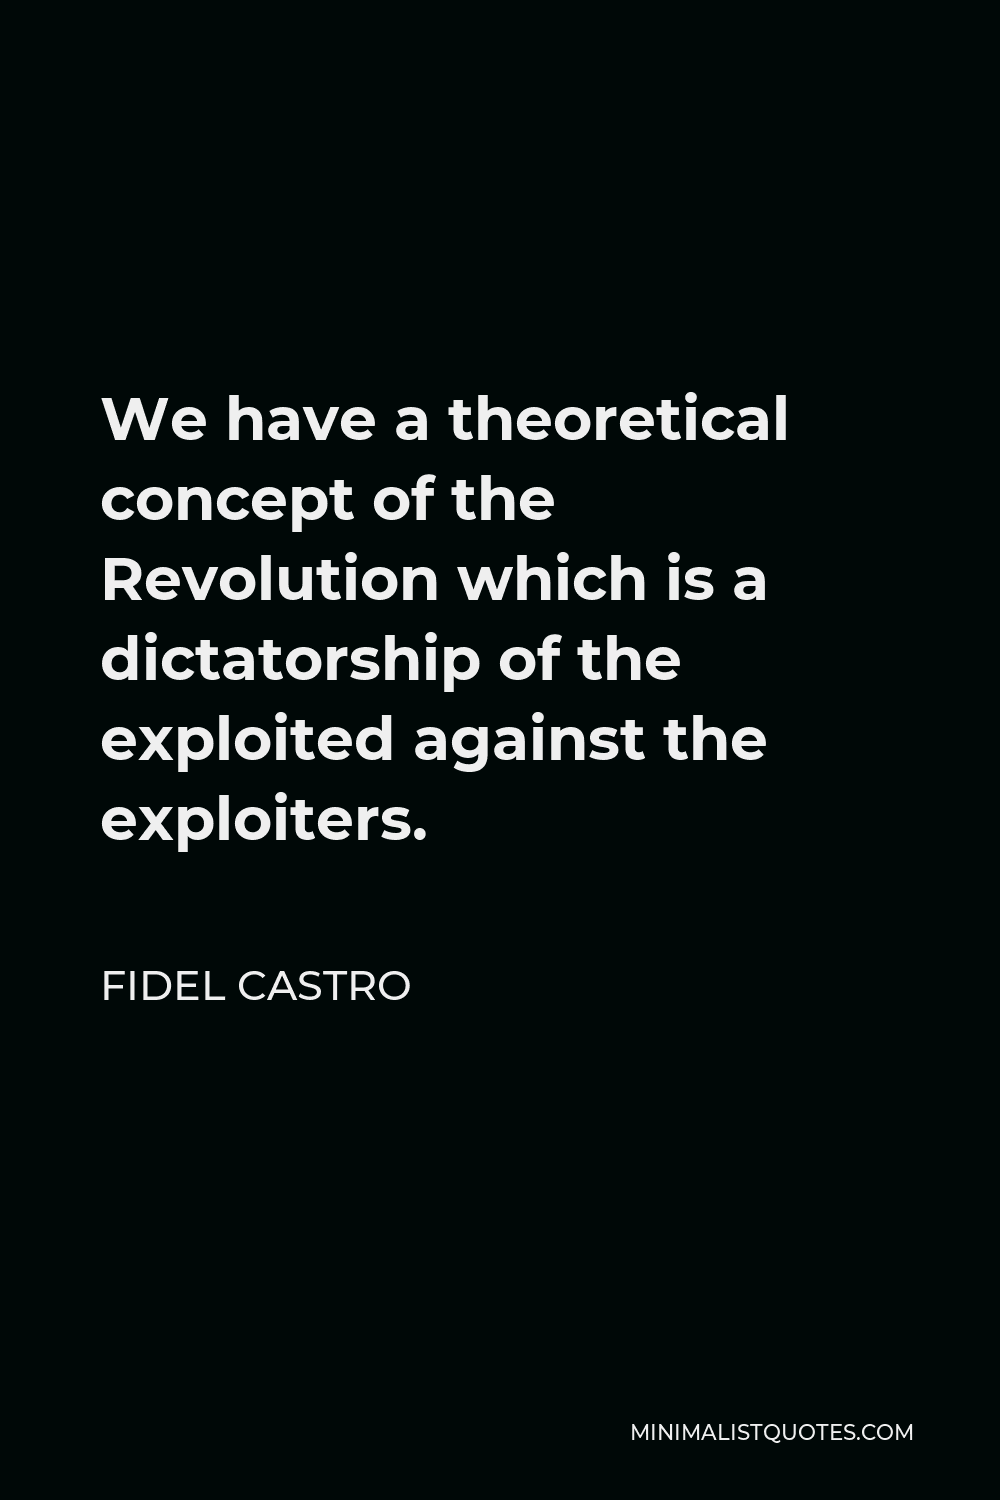 Fidel Castro Quote - We have a theoretical concept of the Revolution which is a dictatorship of the exploited against the exploiters.